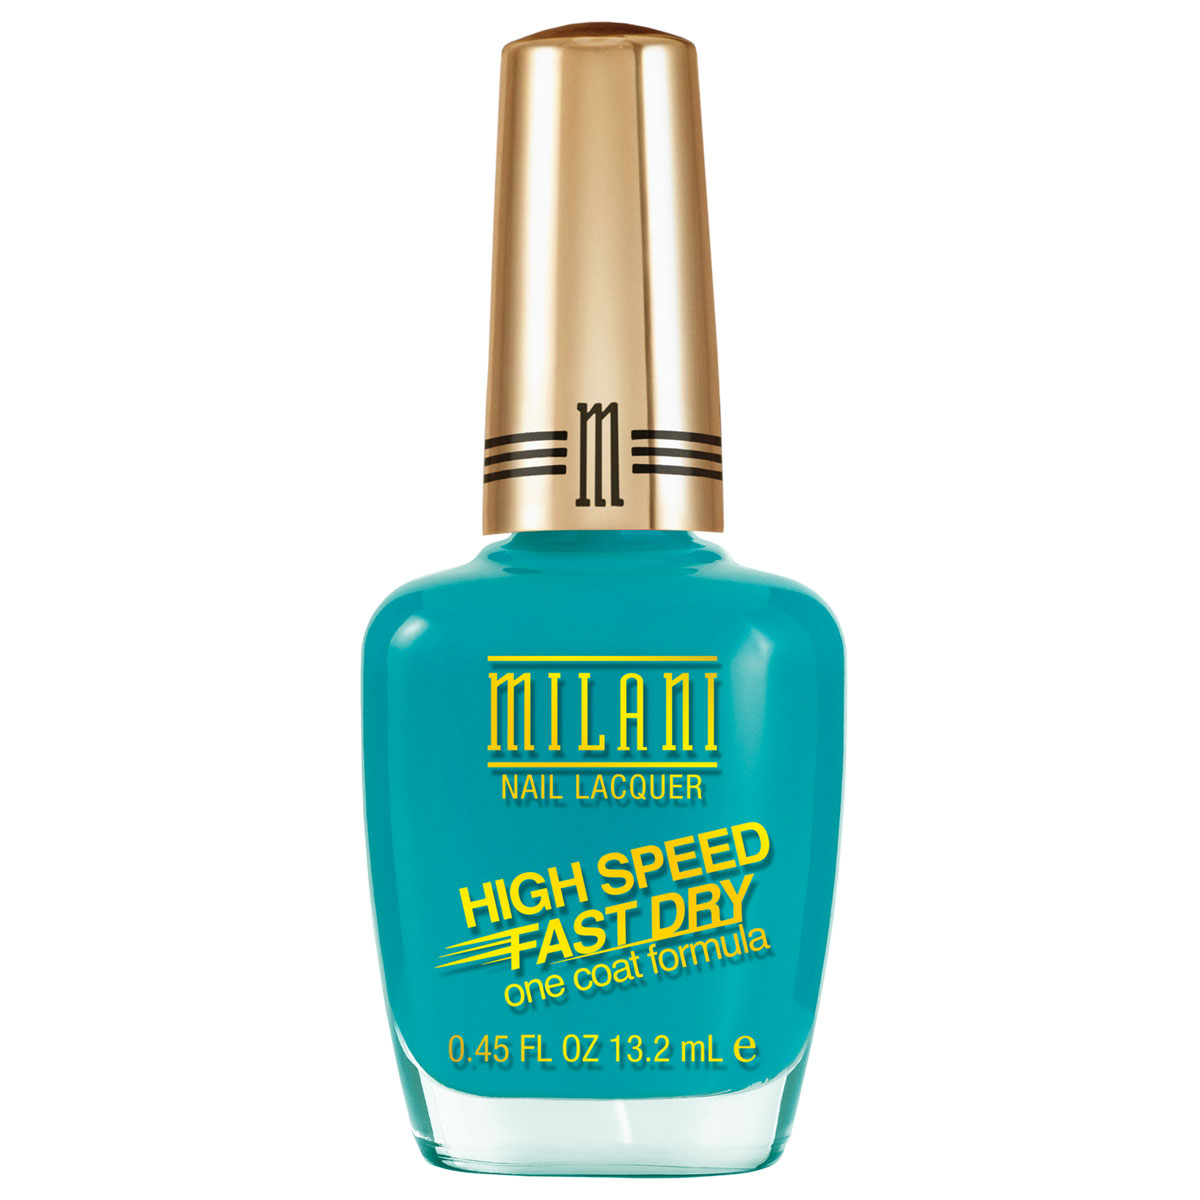 Milani High Speed Fast Dry Nail Lacquer Quick Teal